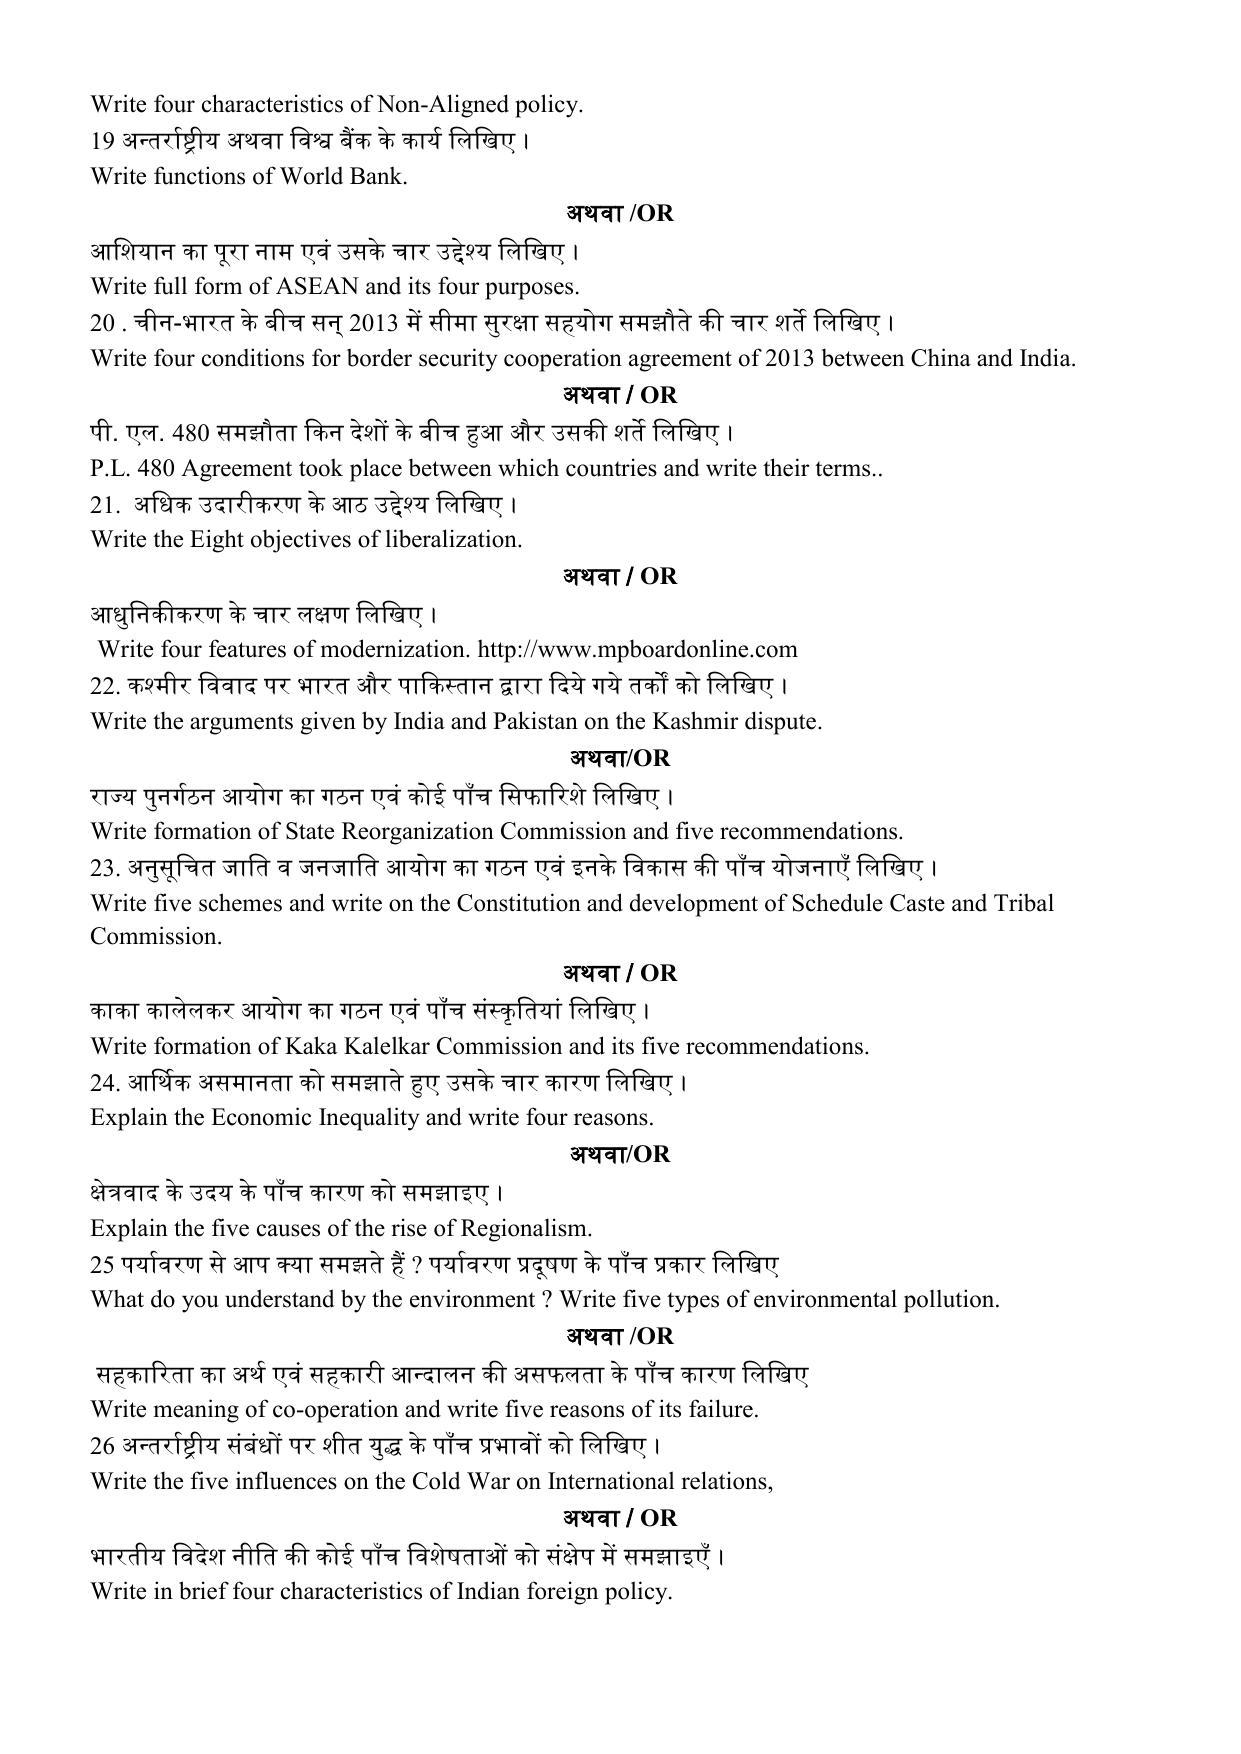 MP Board Class 12 Political Science 2019 Question Paper - Page 4